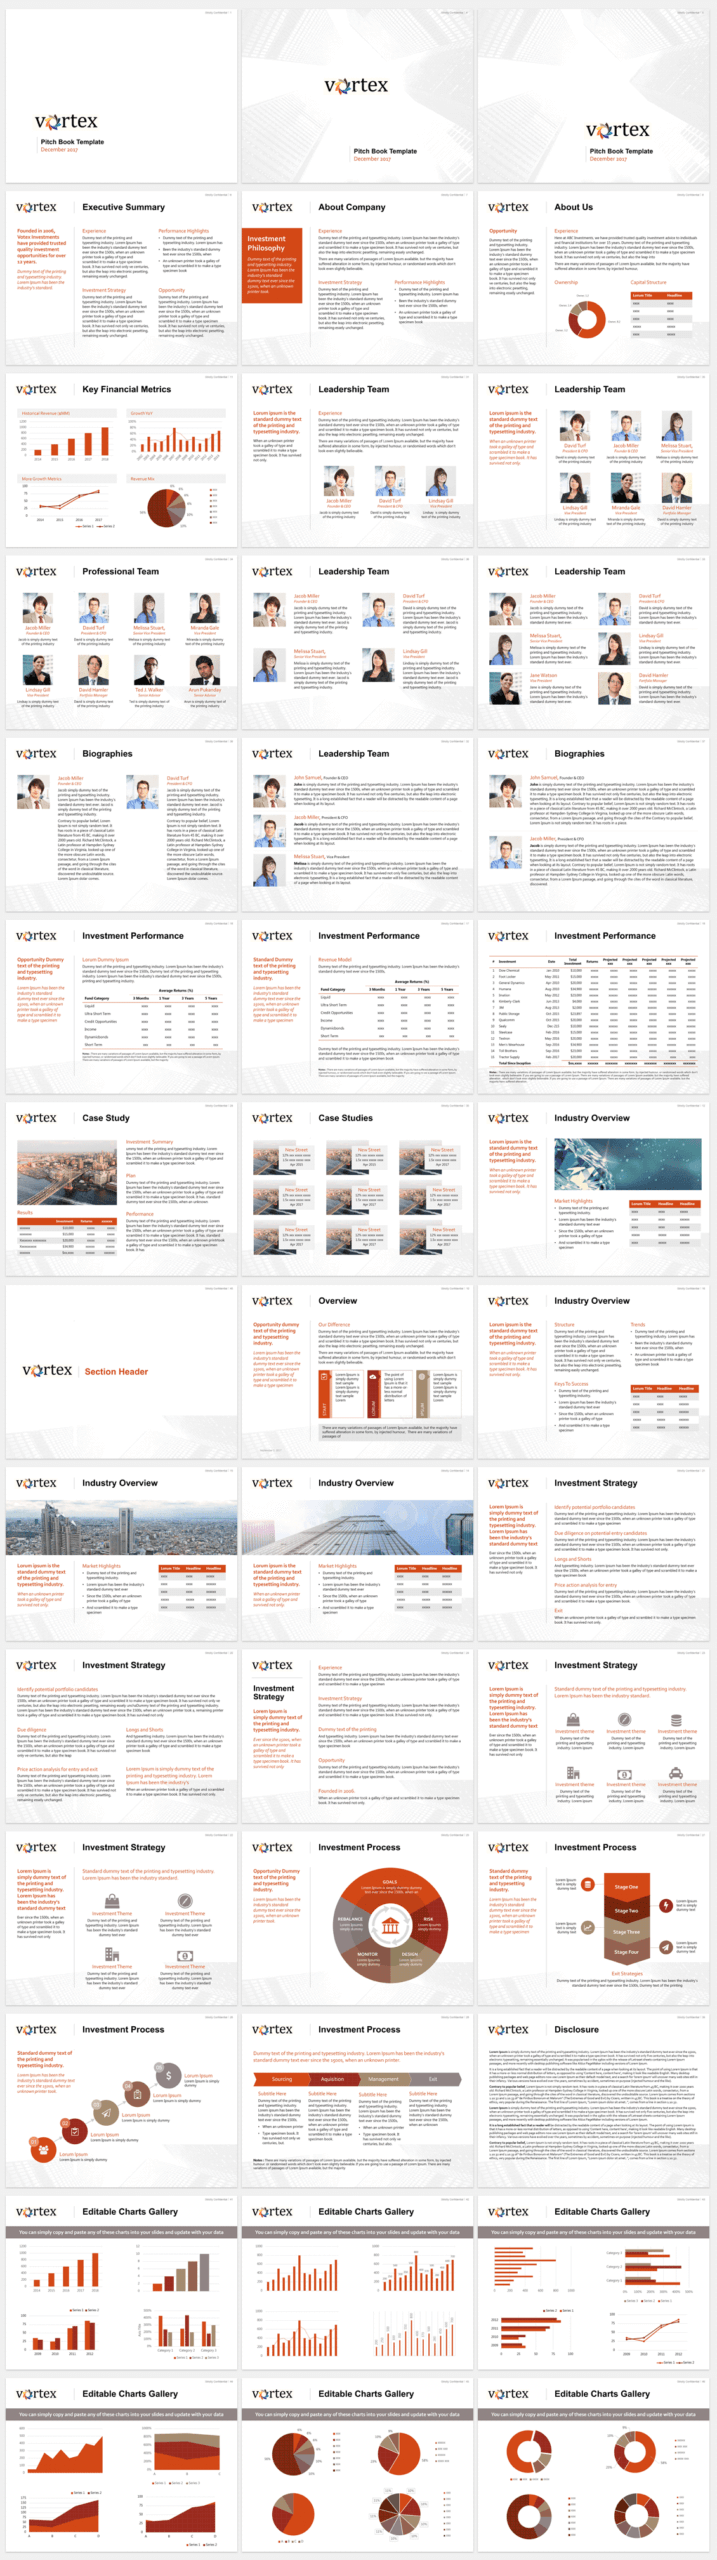 Powerpoint Pitch Book Template - Calep.midnightpig.co Throughout Powerpoint Pitch Book Template